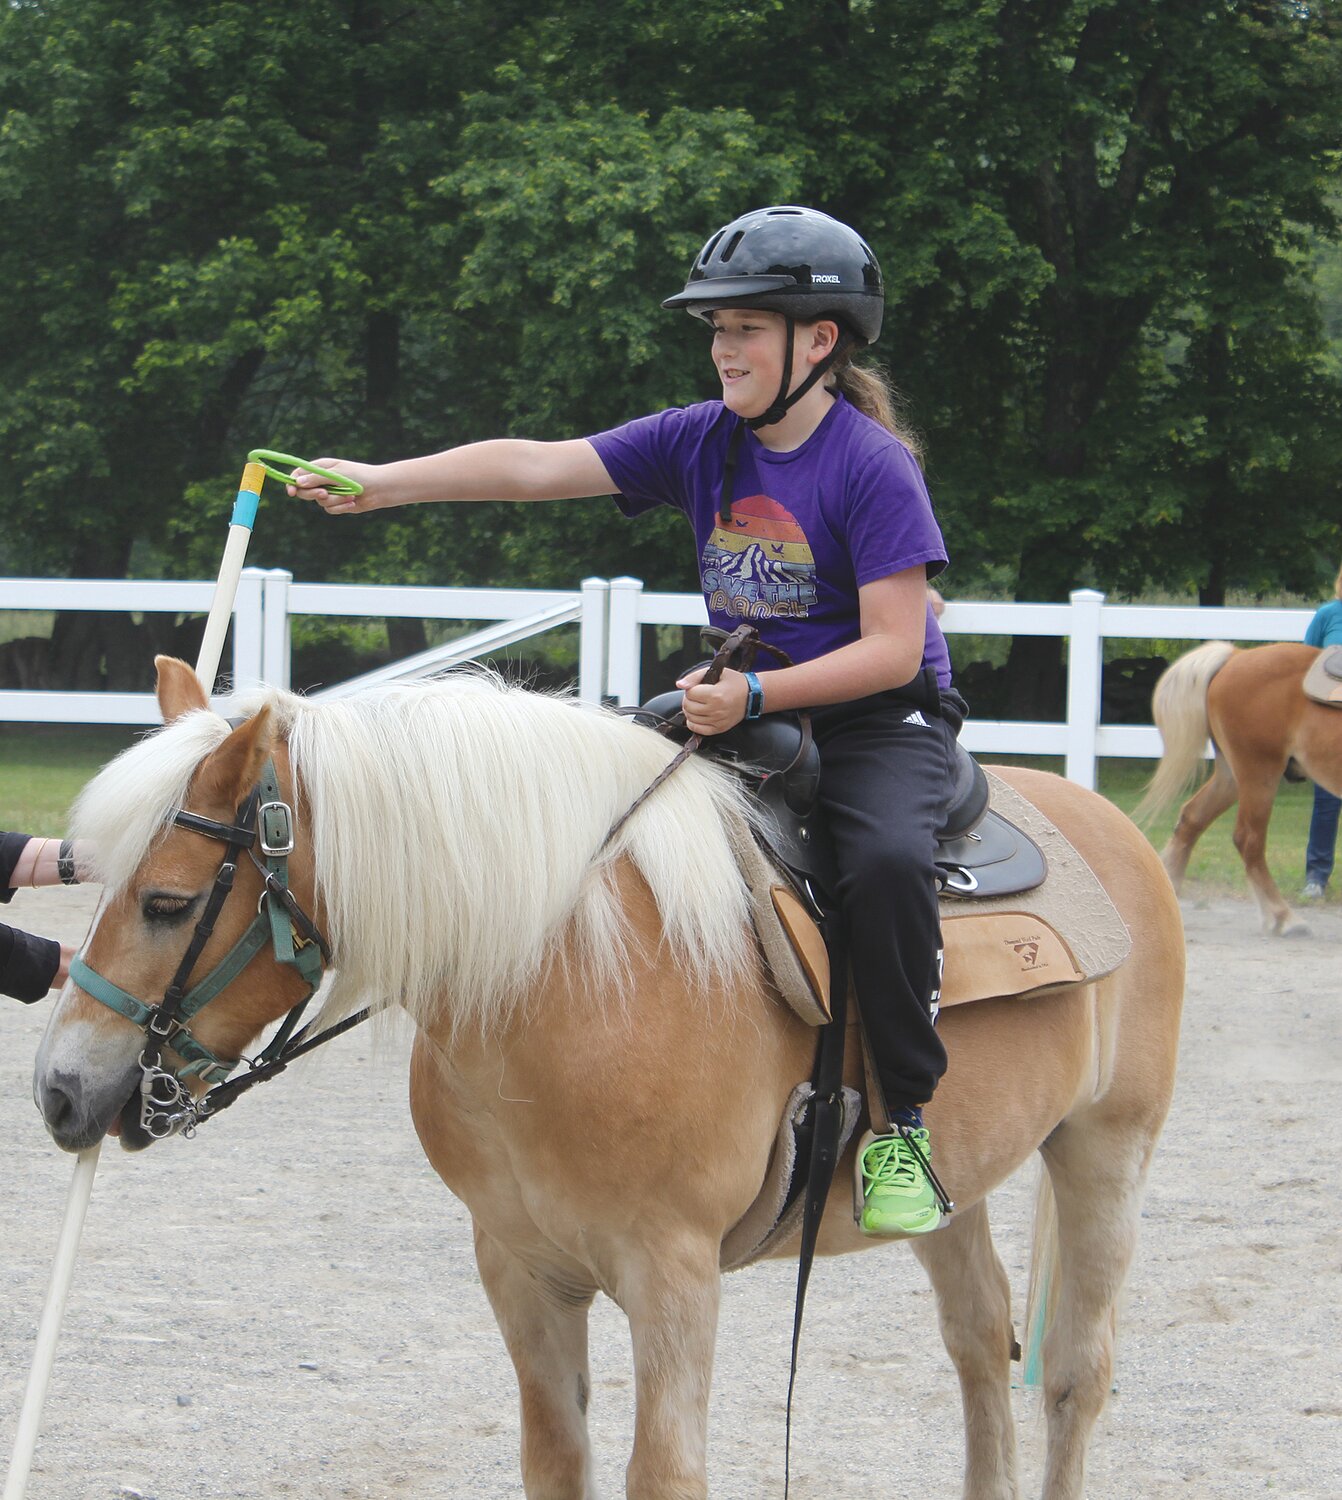 Wolf School students have gone horseback riding during their school day for many years. Aside from the benefits of physical activity, many are building social skills, boosting their confidence and overcoming fears.